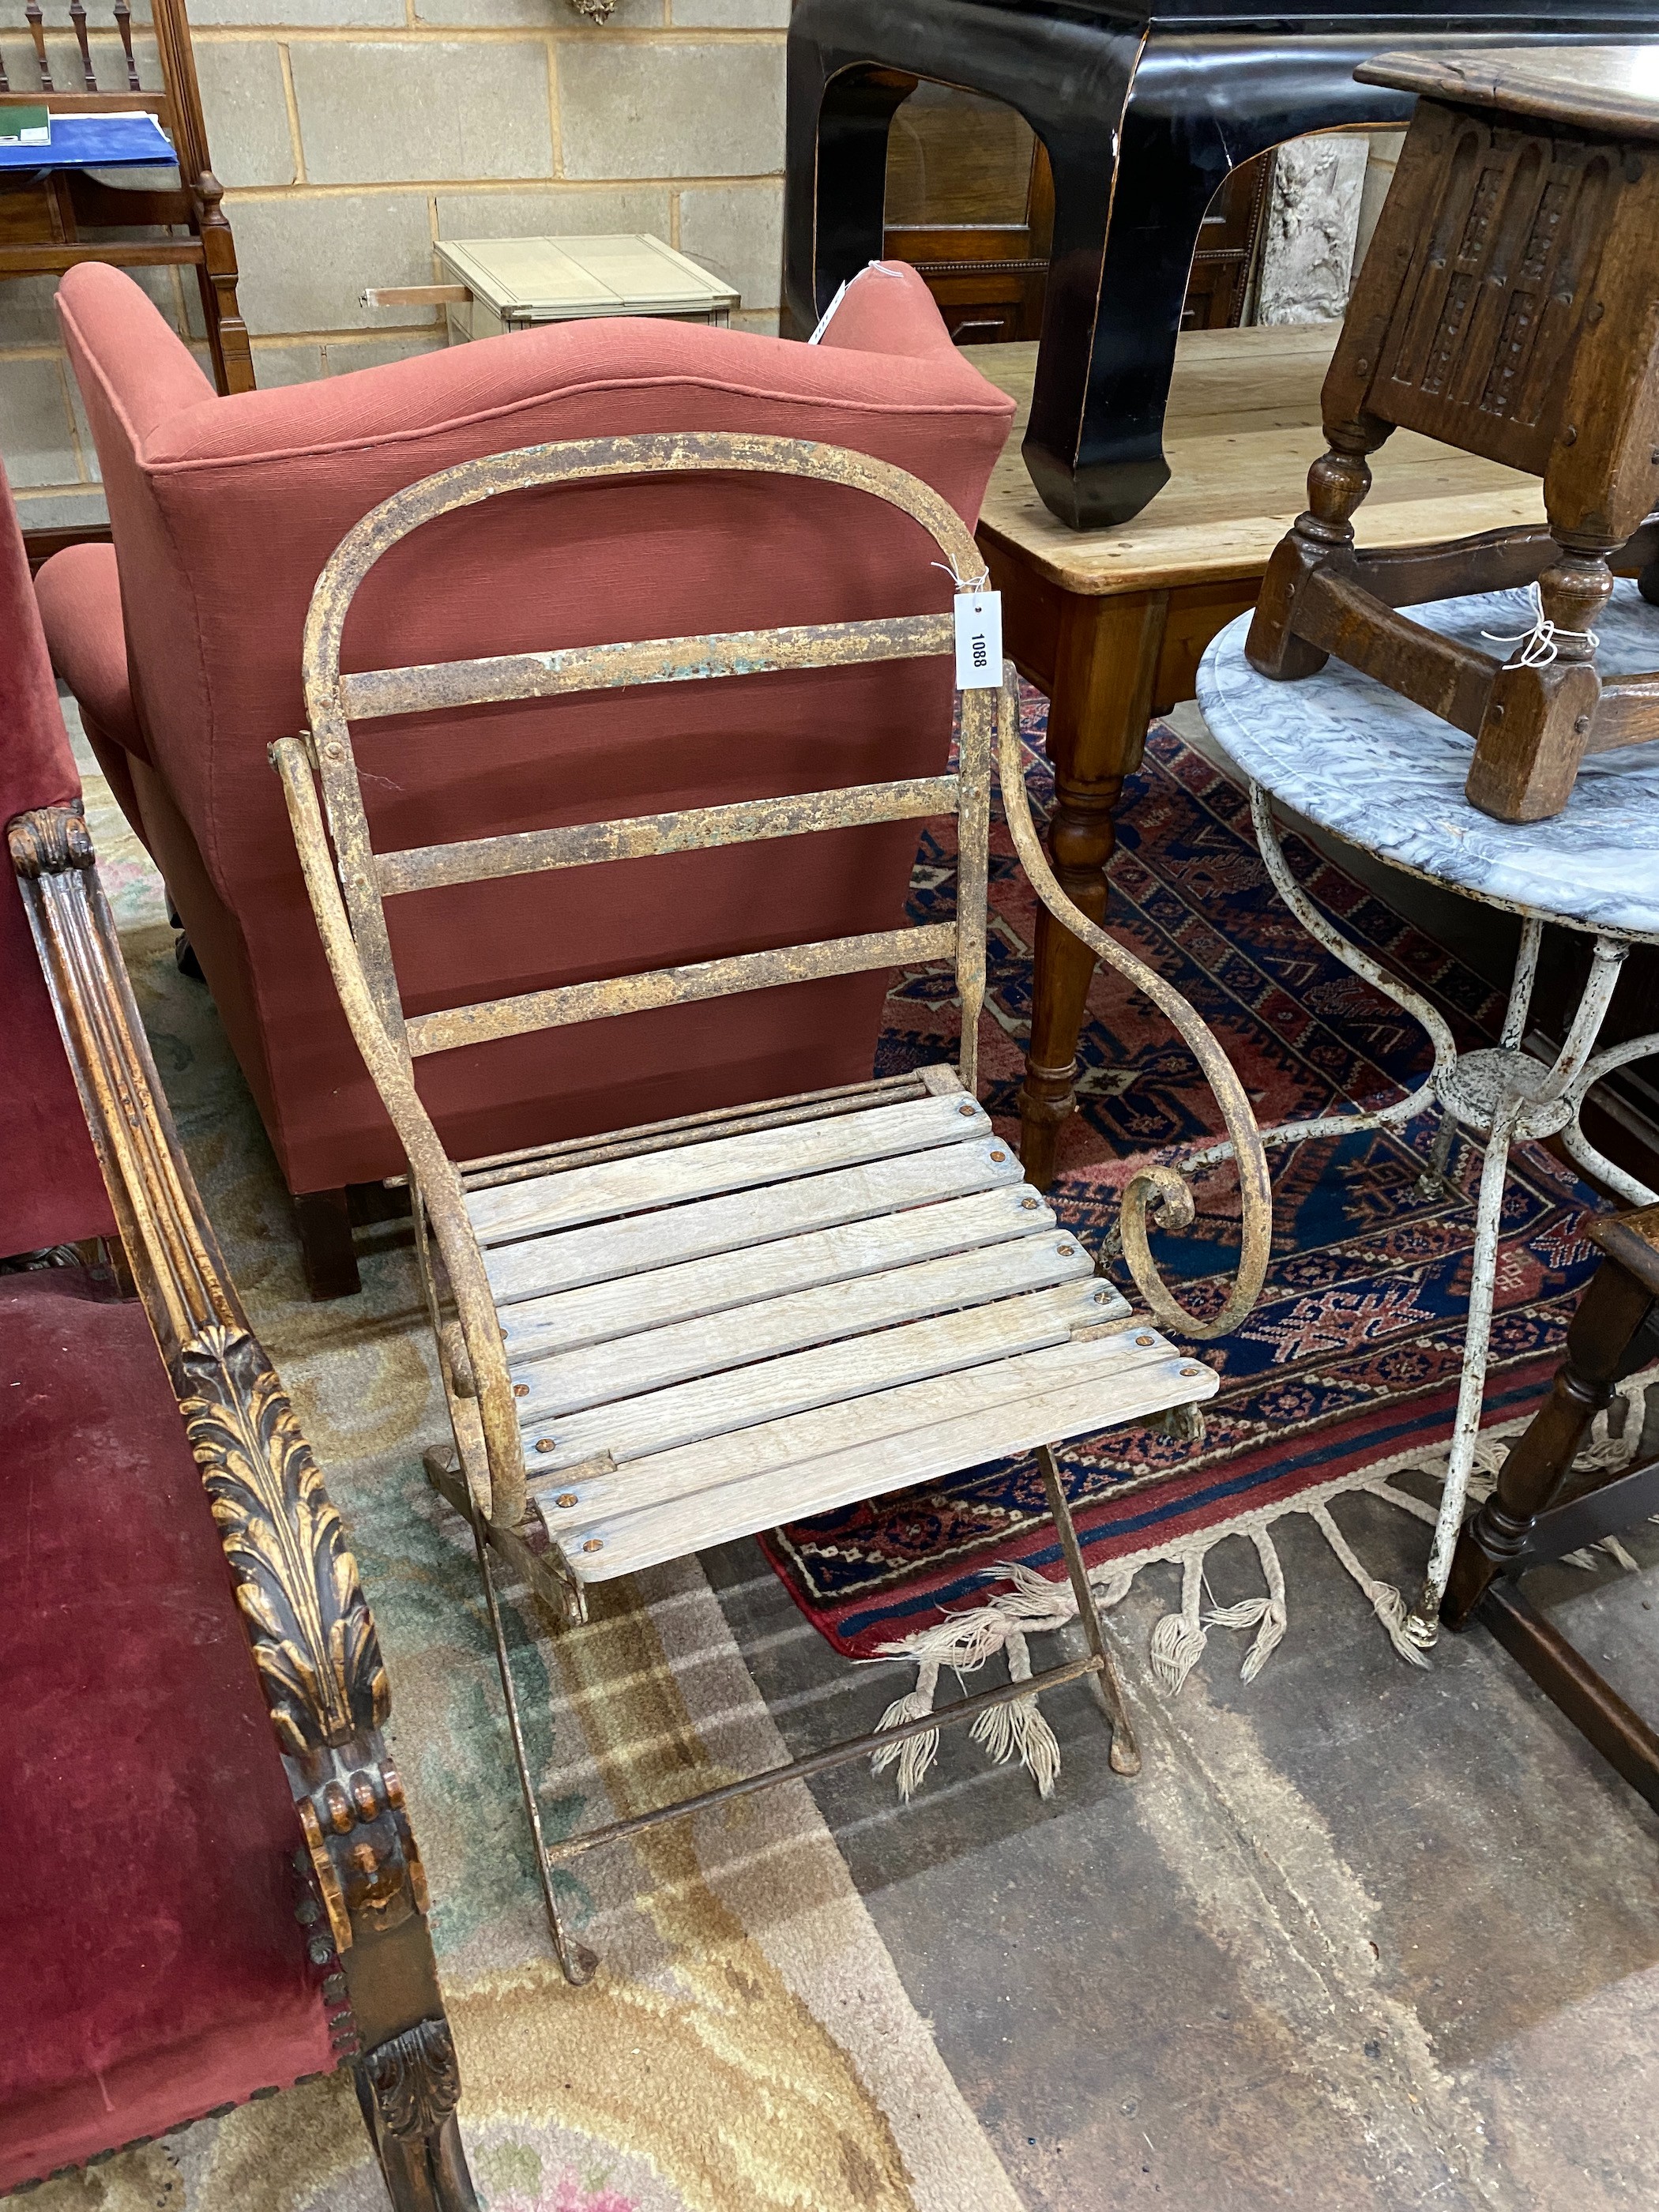 A wrought iron folding garden chair with slatted wood seat